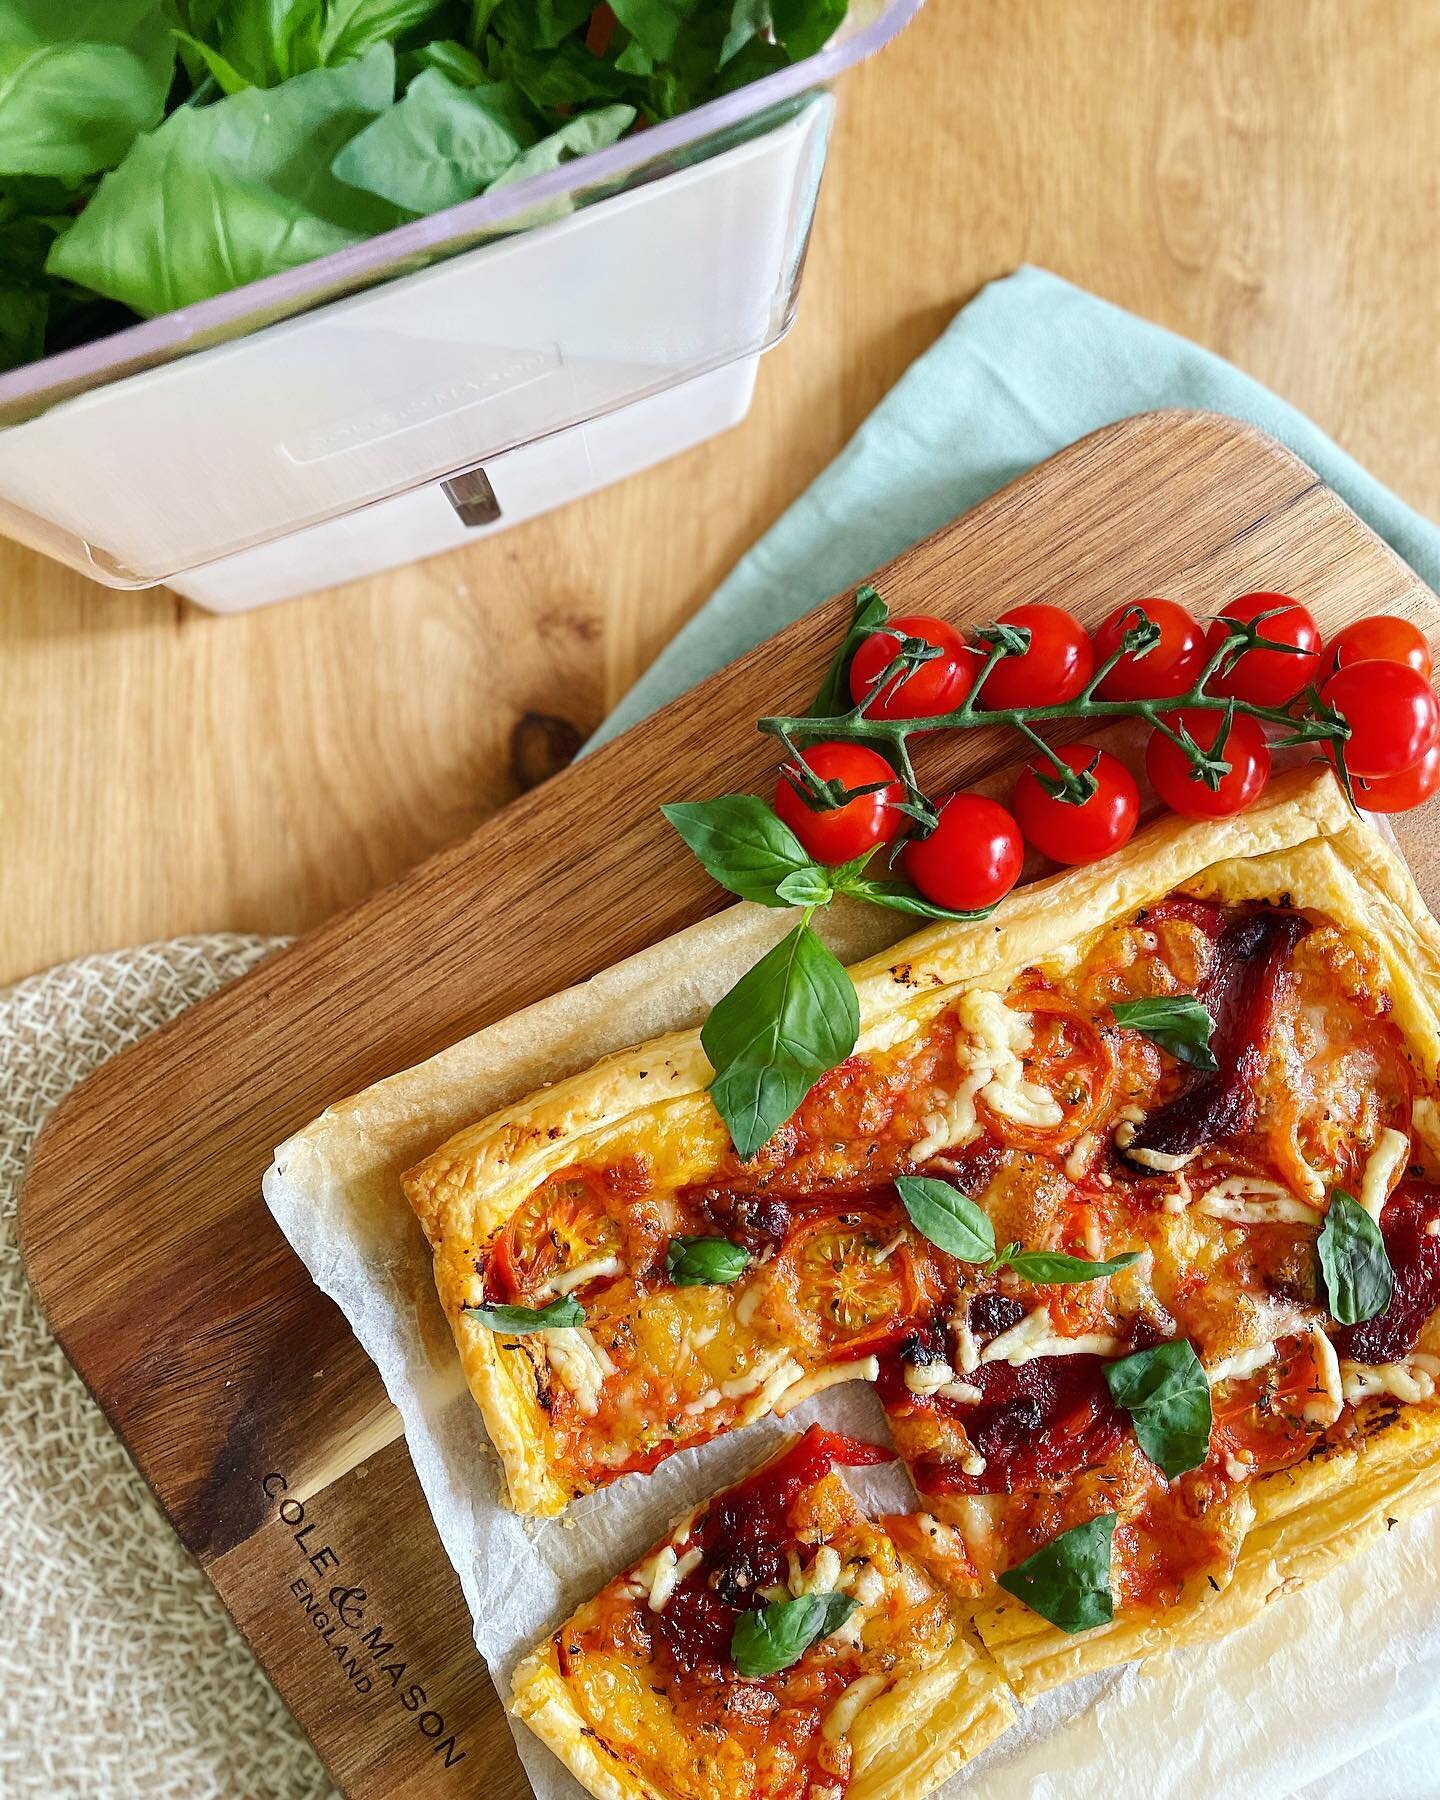 Get the recipe for this easy Red Pepper, Tomato and Basil Tart served up on my gifted @coleandmason Barkway Acacia Serving Board and kept my basil nice and fresh with their Freshly Cut Herb Keeper 🌿 

Grab a pack of ready roll puff pastry and either